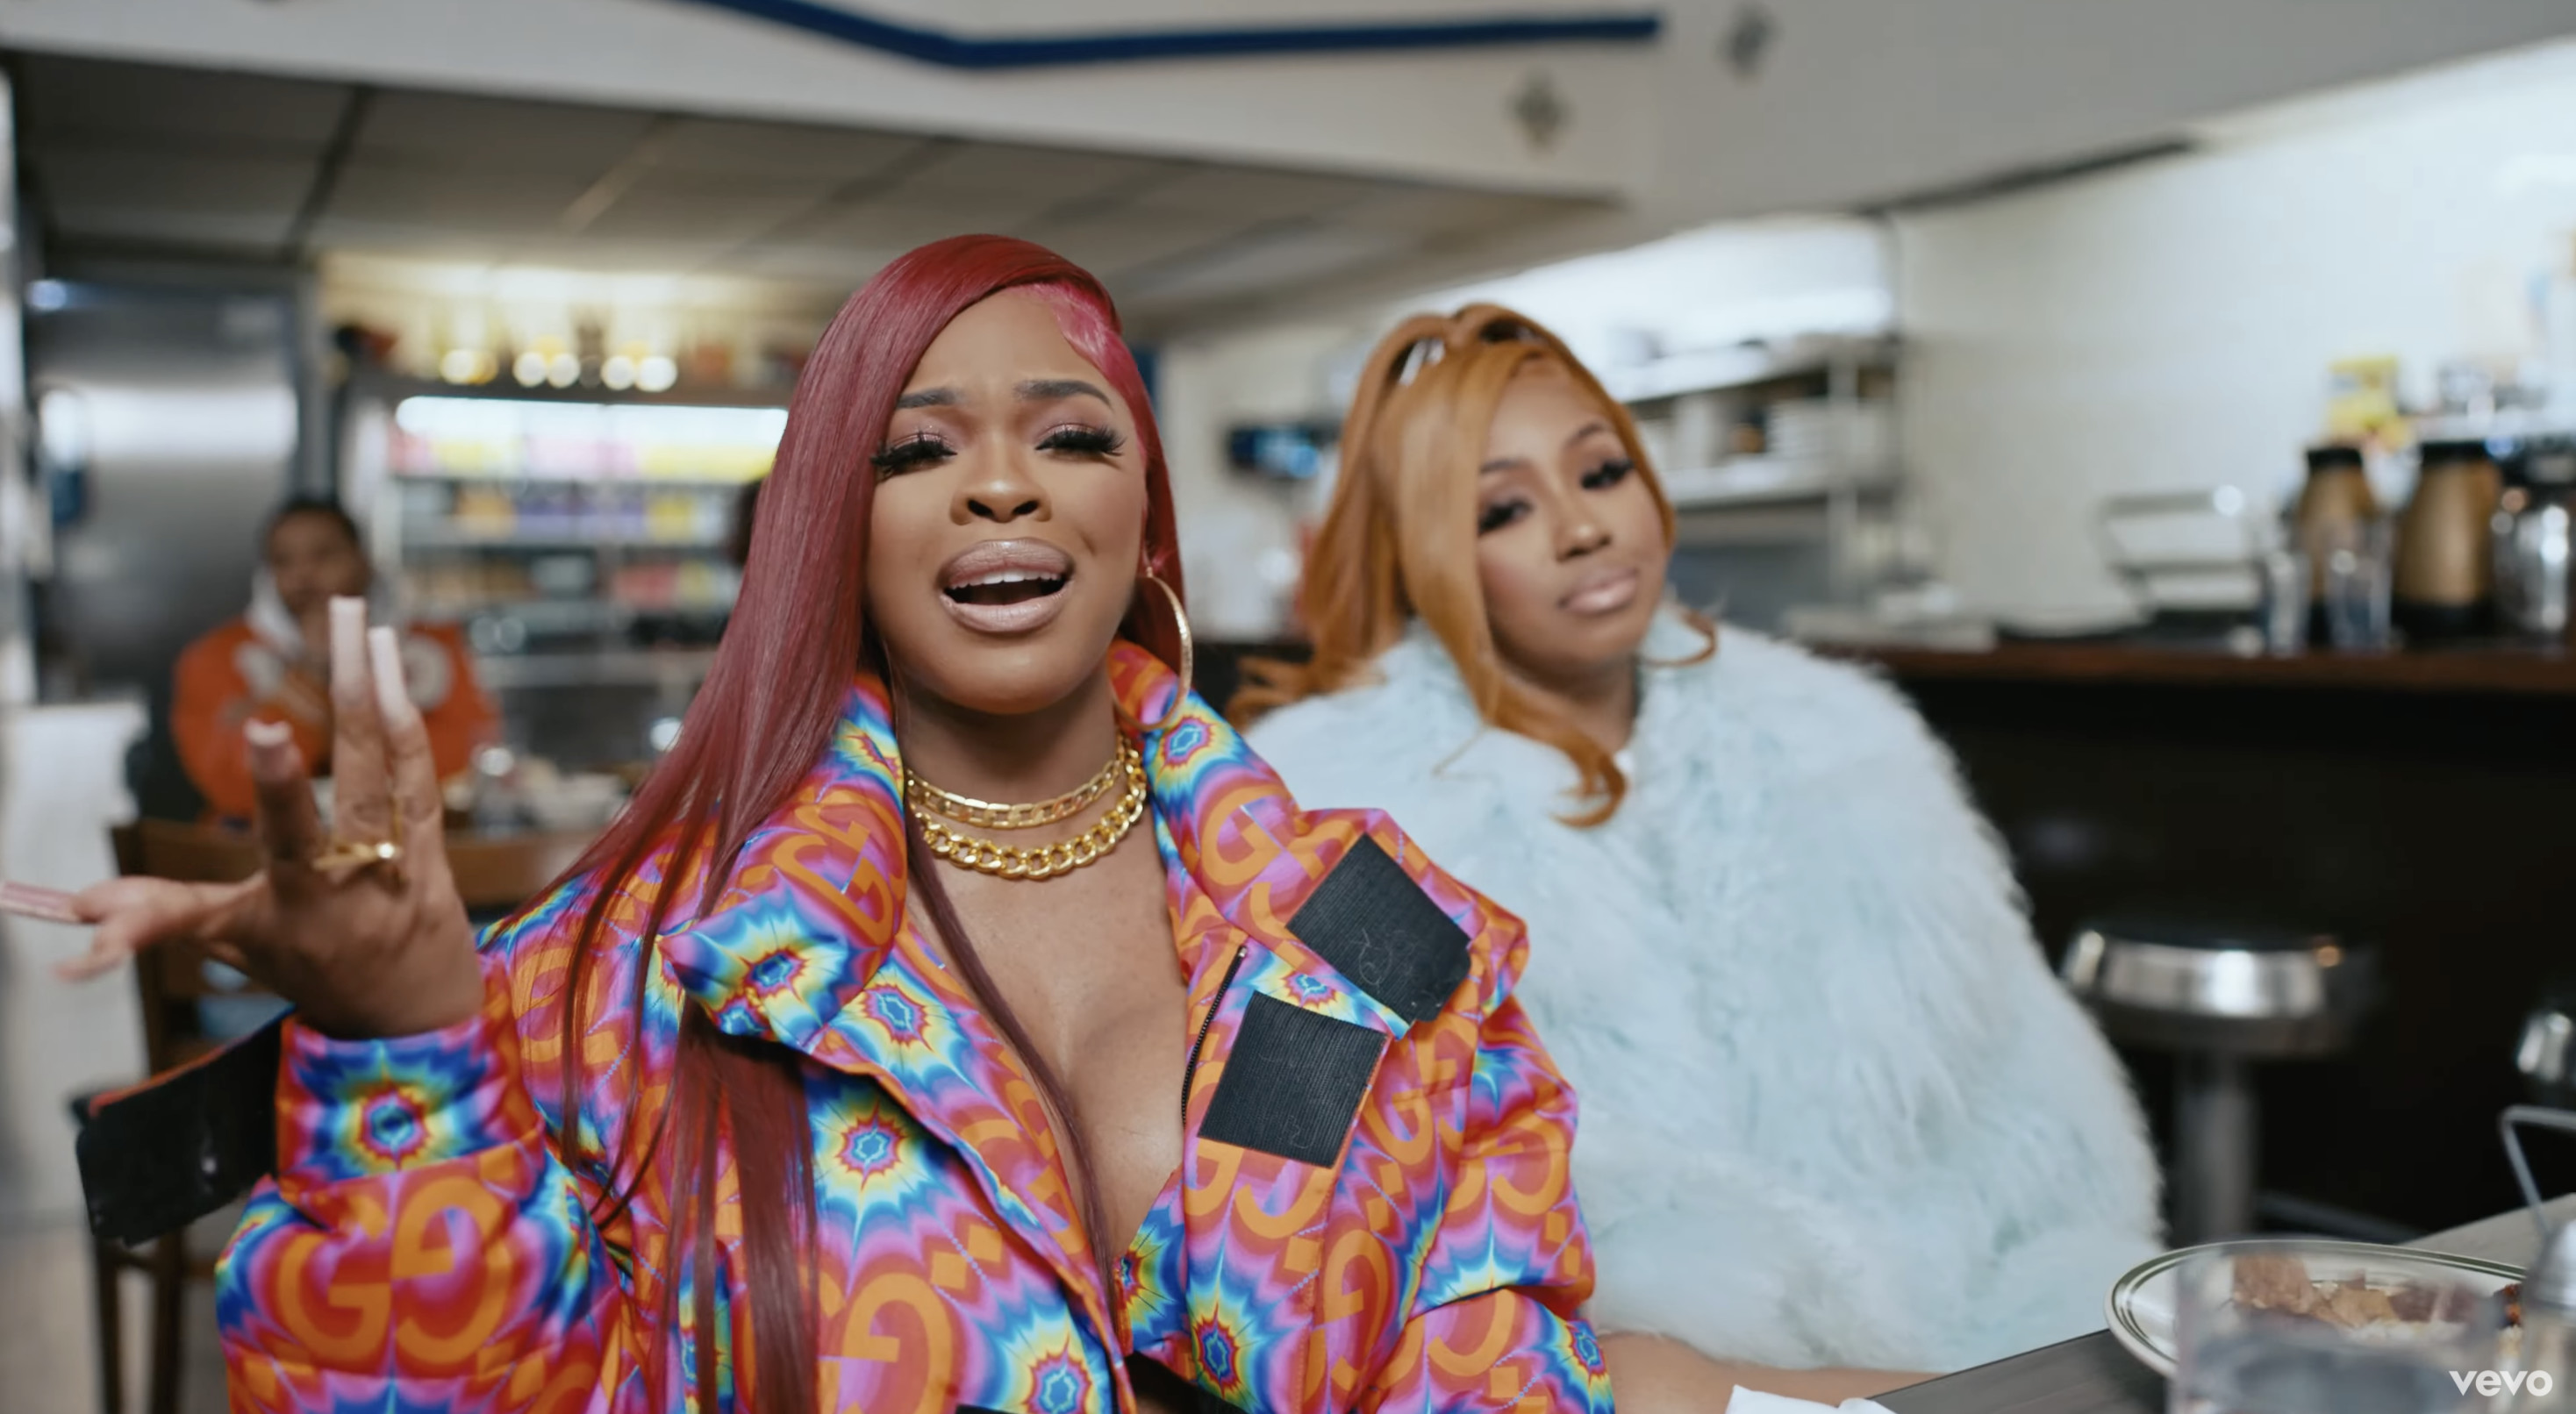 City Girls & Fivio Foreign Partner Up On “Top Notch”